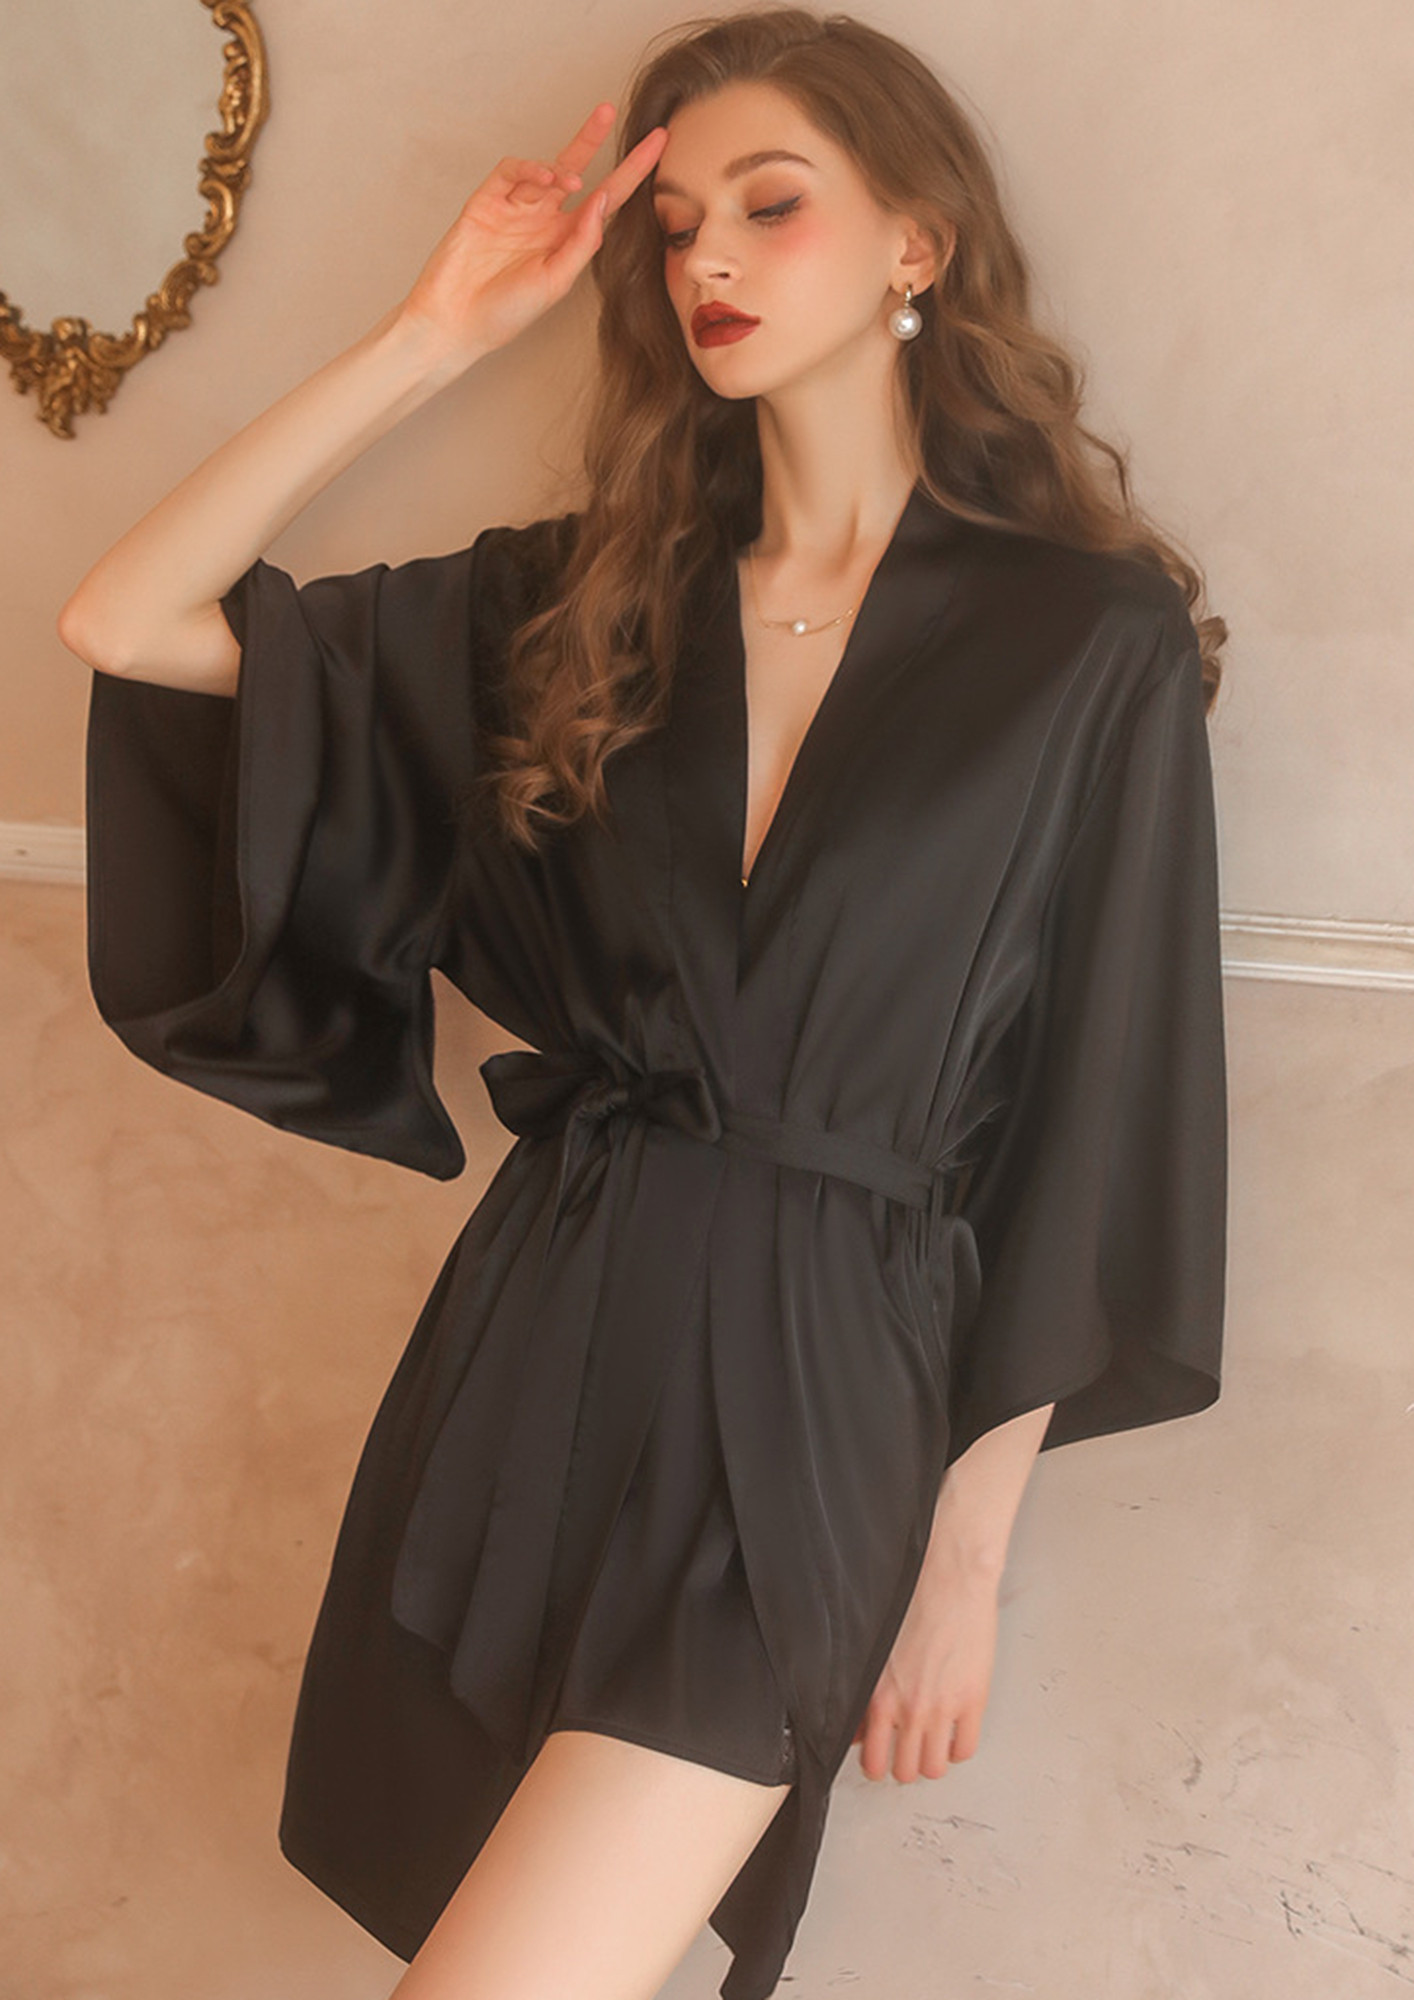 Buy Black Satin Kimono Robe Lace Dressing Gown Robes for Women Lace Bridal  Short Robe Wedding Robe for Bride Bridal Party Gift for Daughter Online in  India - Etsy